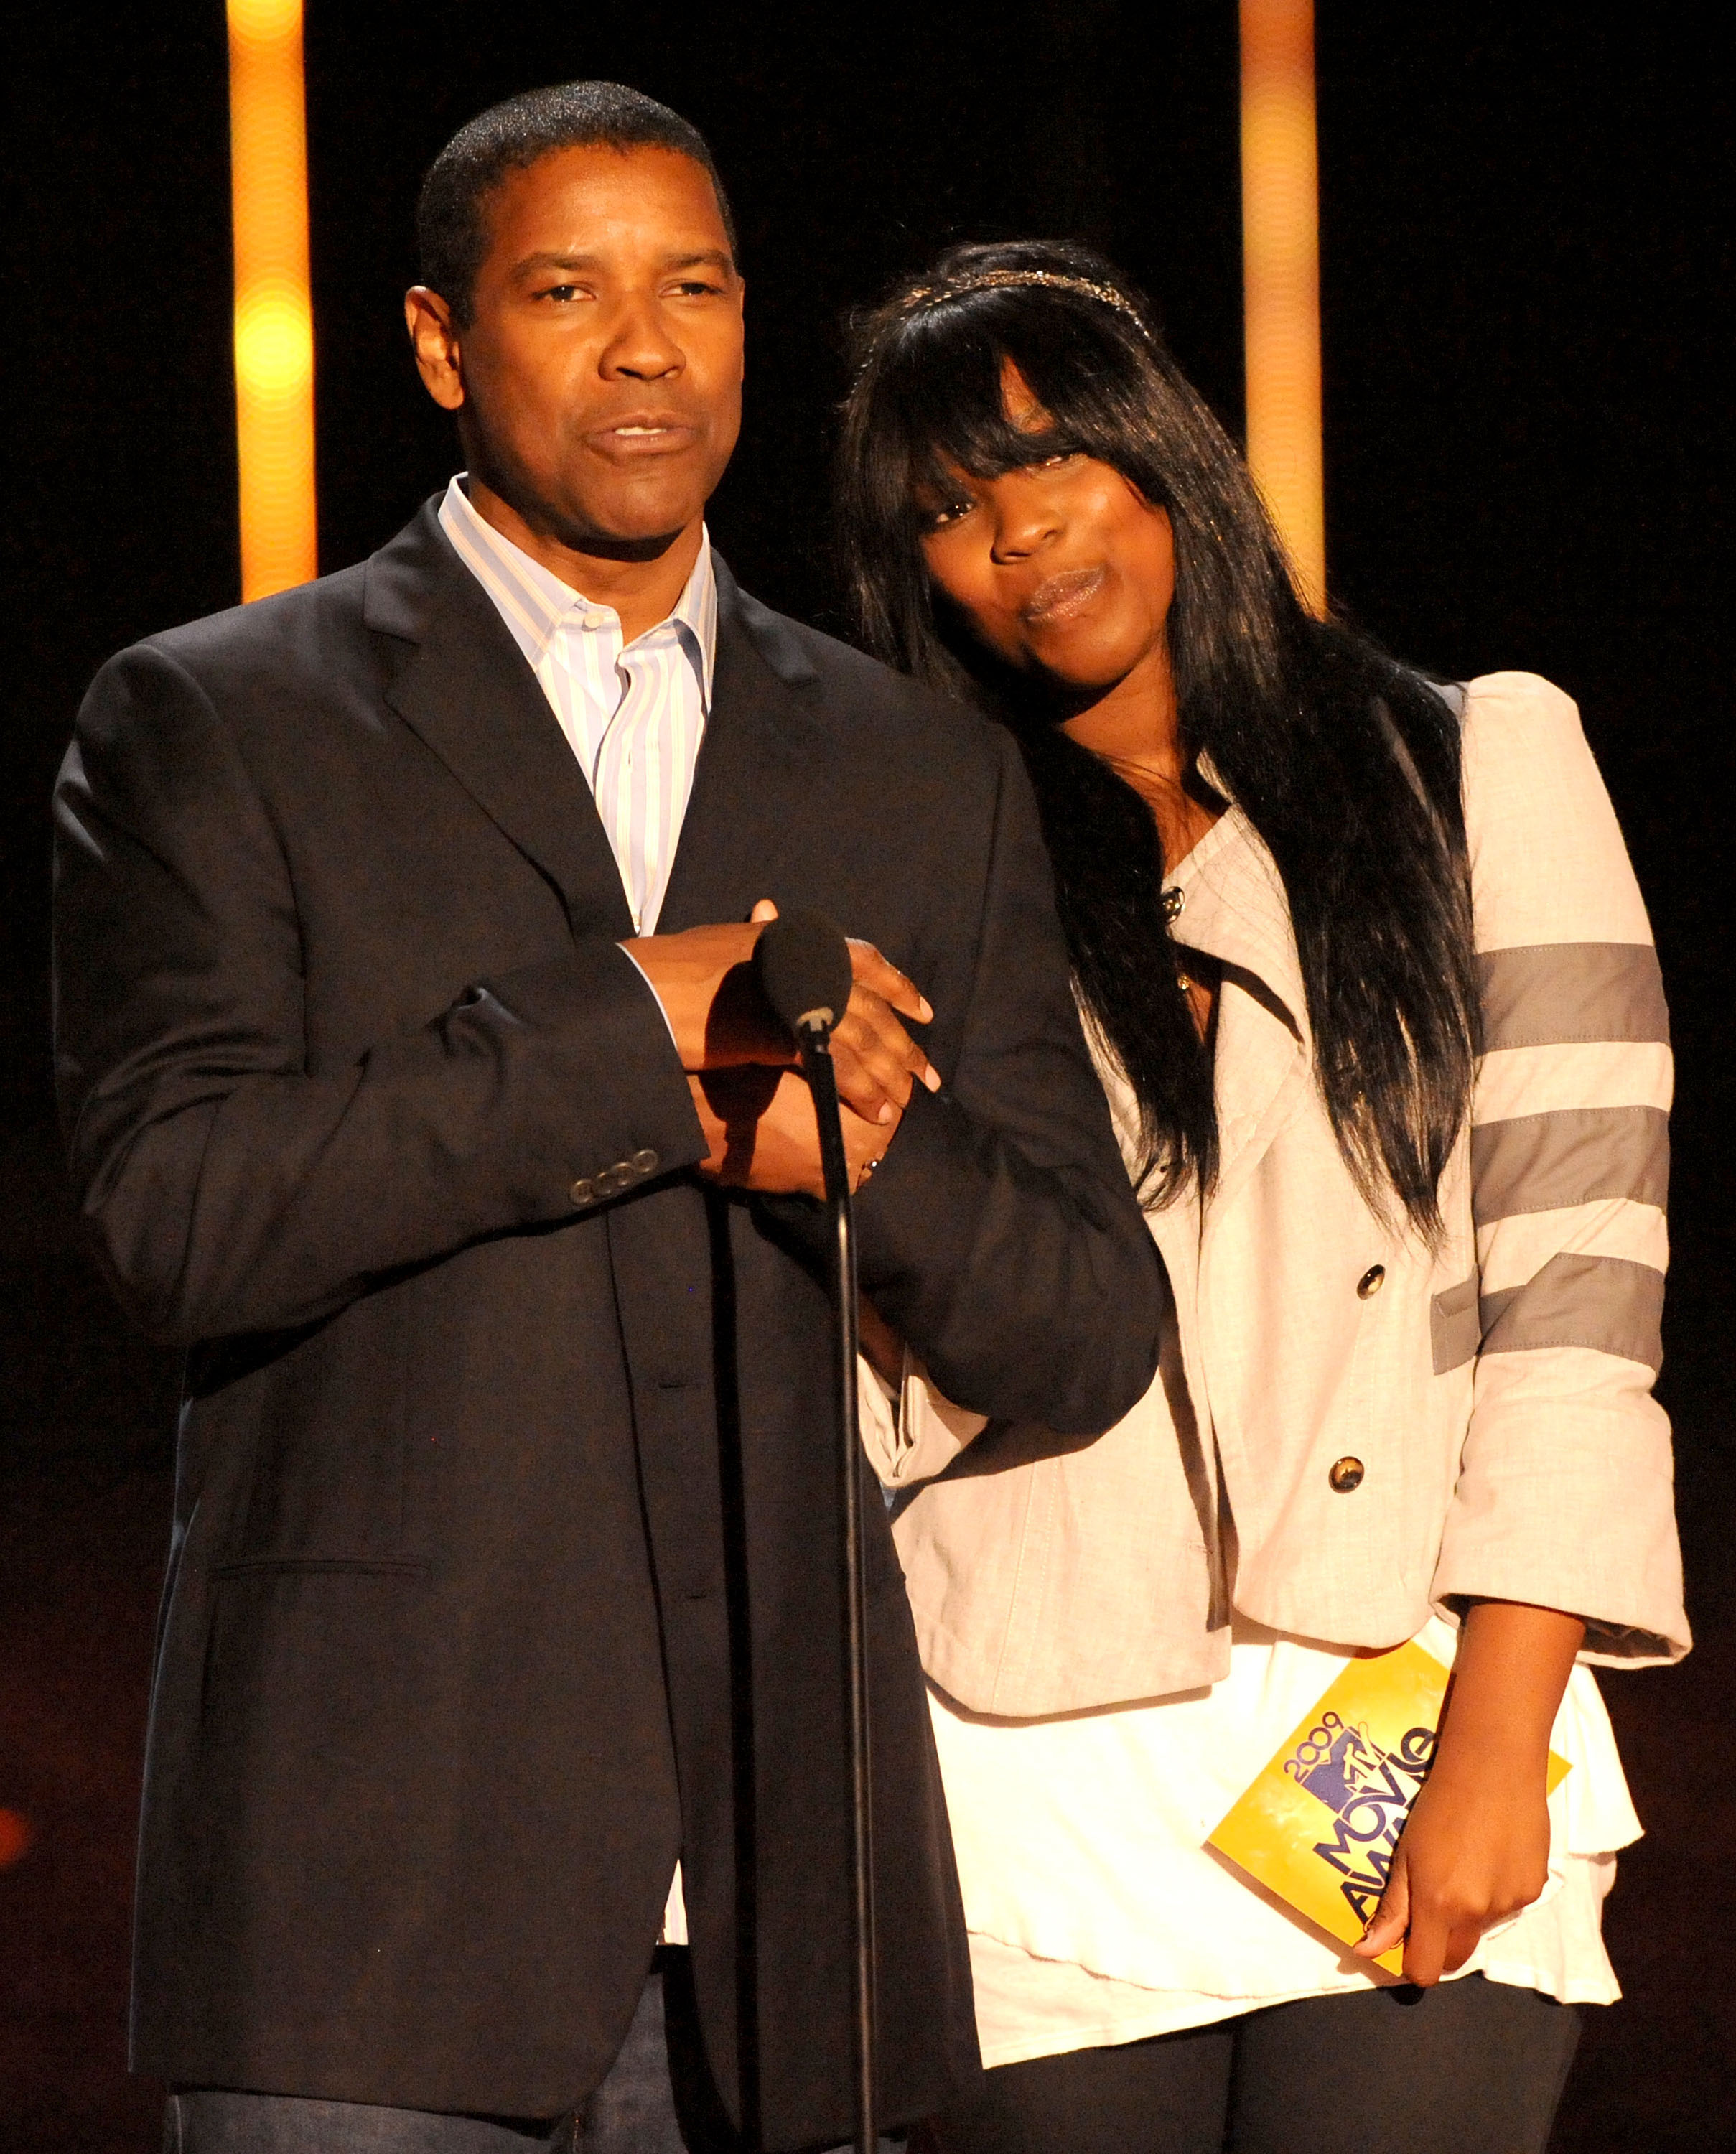 Denzel Washington and daughter Olivia during the 2009 MTV Movie Awards in Universal City, California on May 31, 2009 | Source: Getty Images